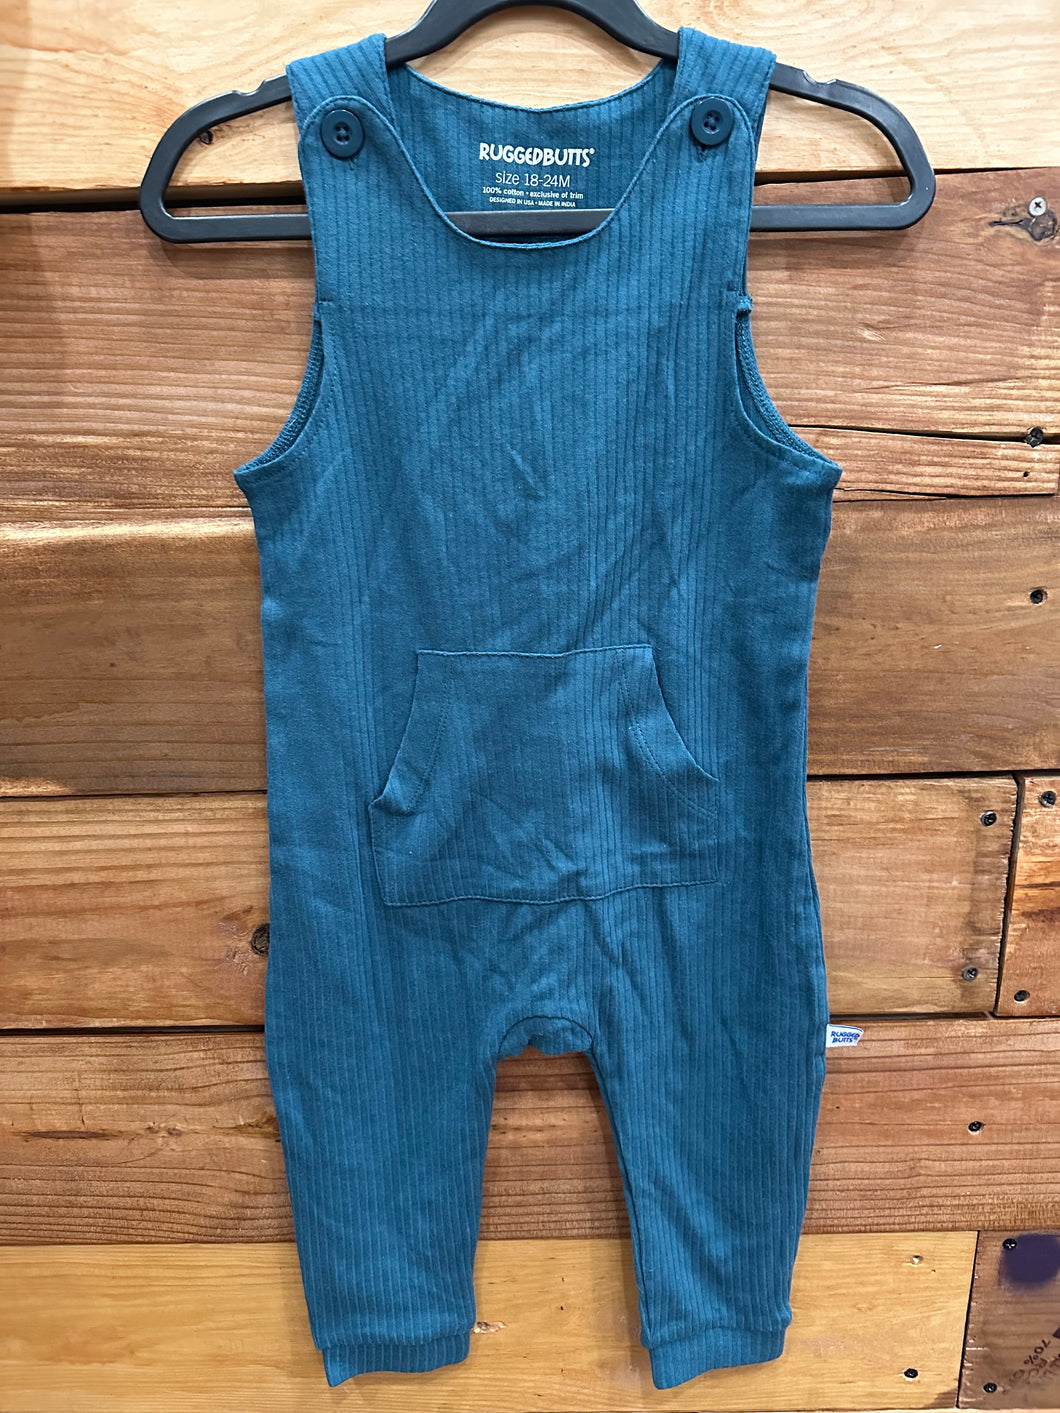 Rugged Butts Dark Teal Romper Size 18-24m